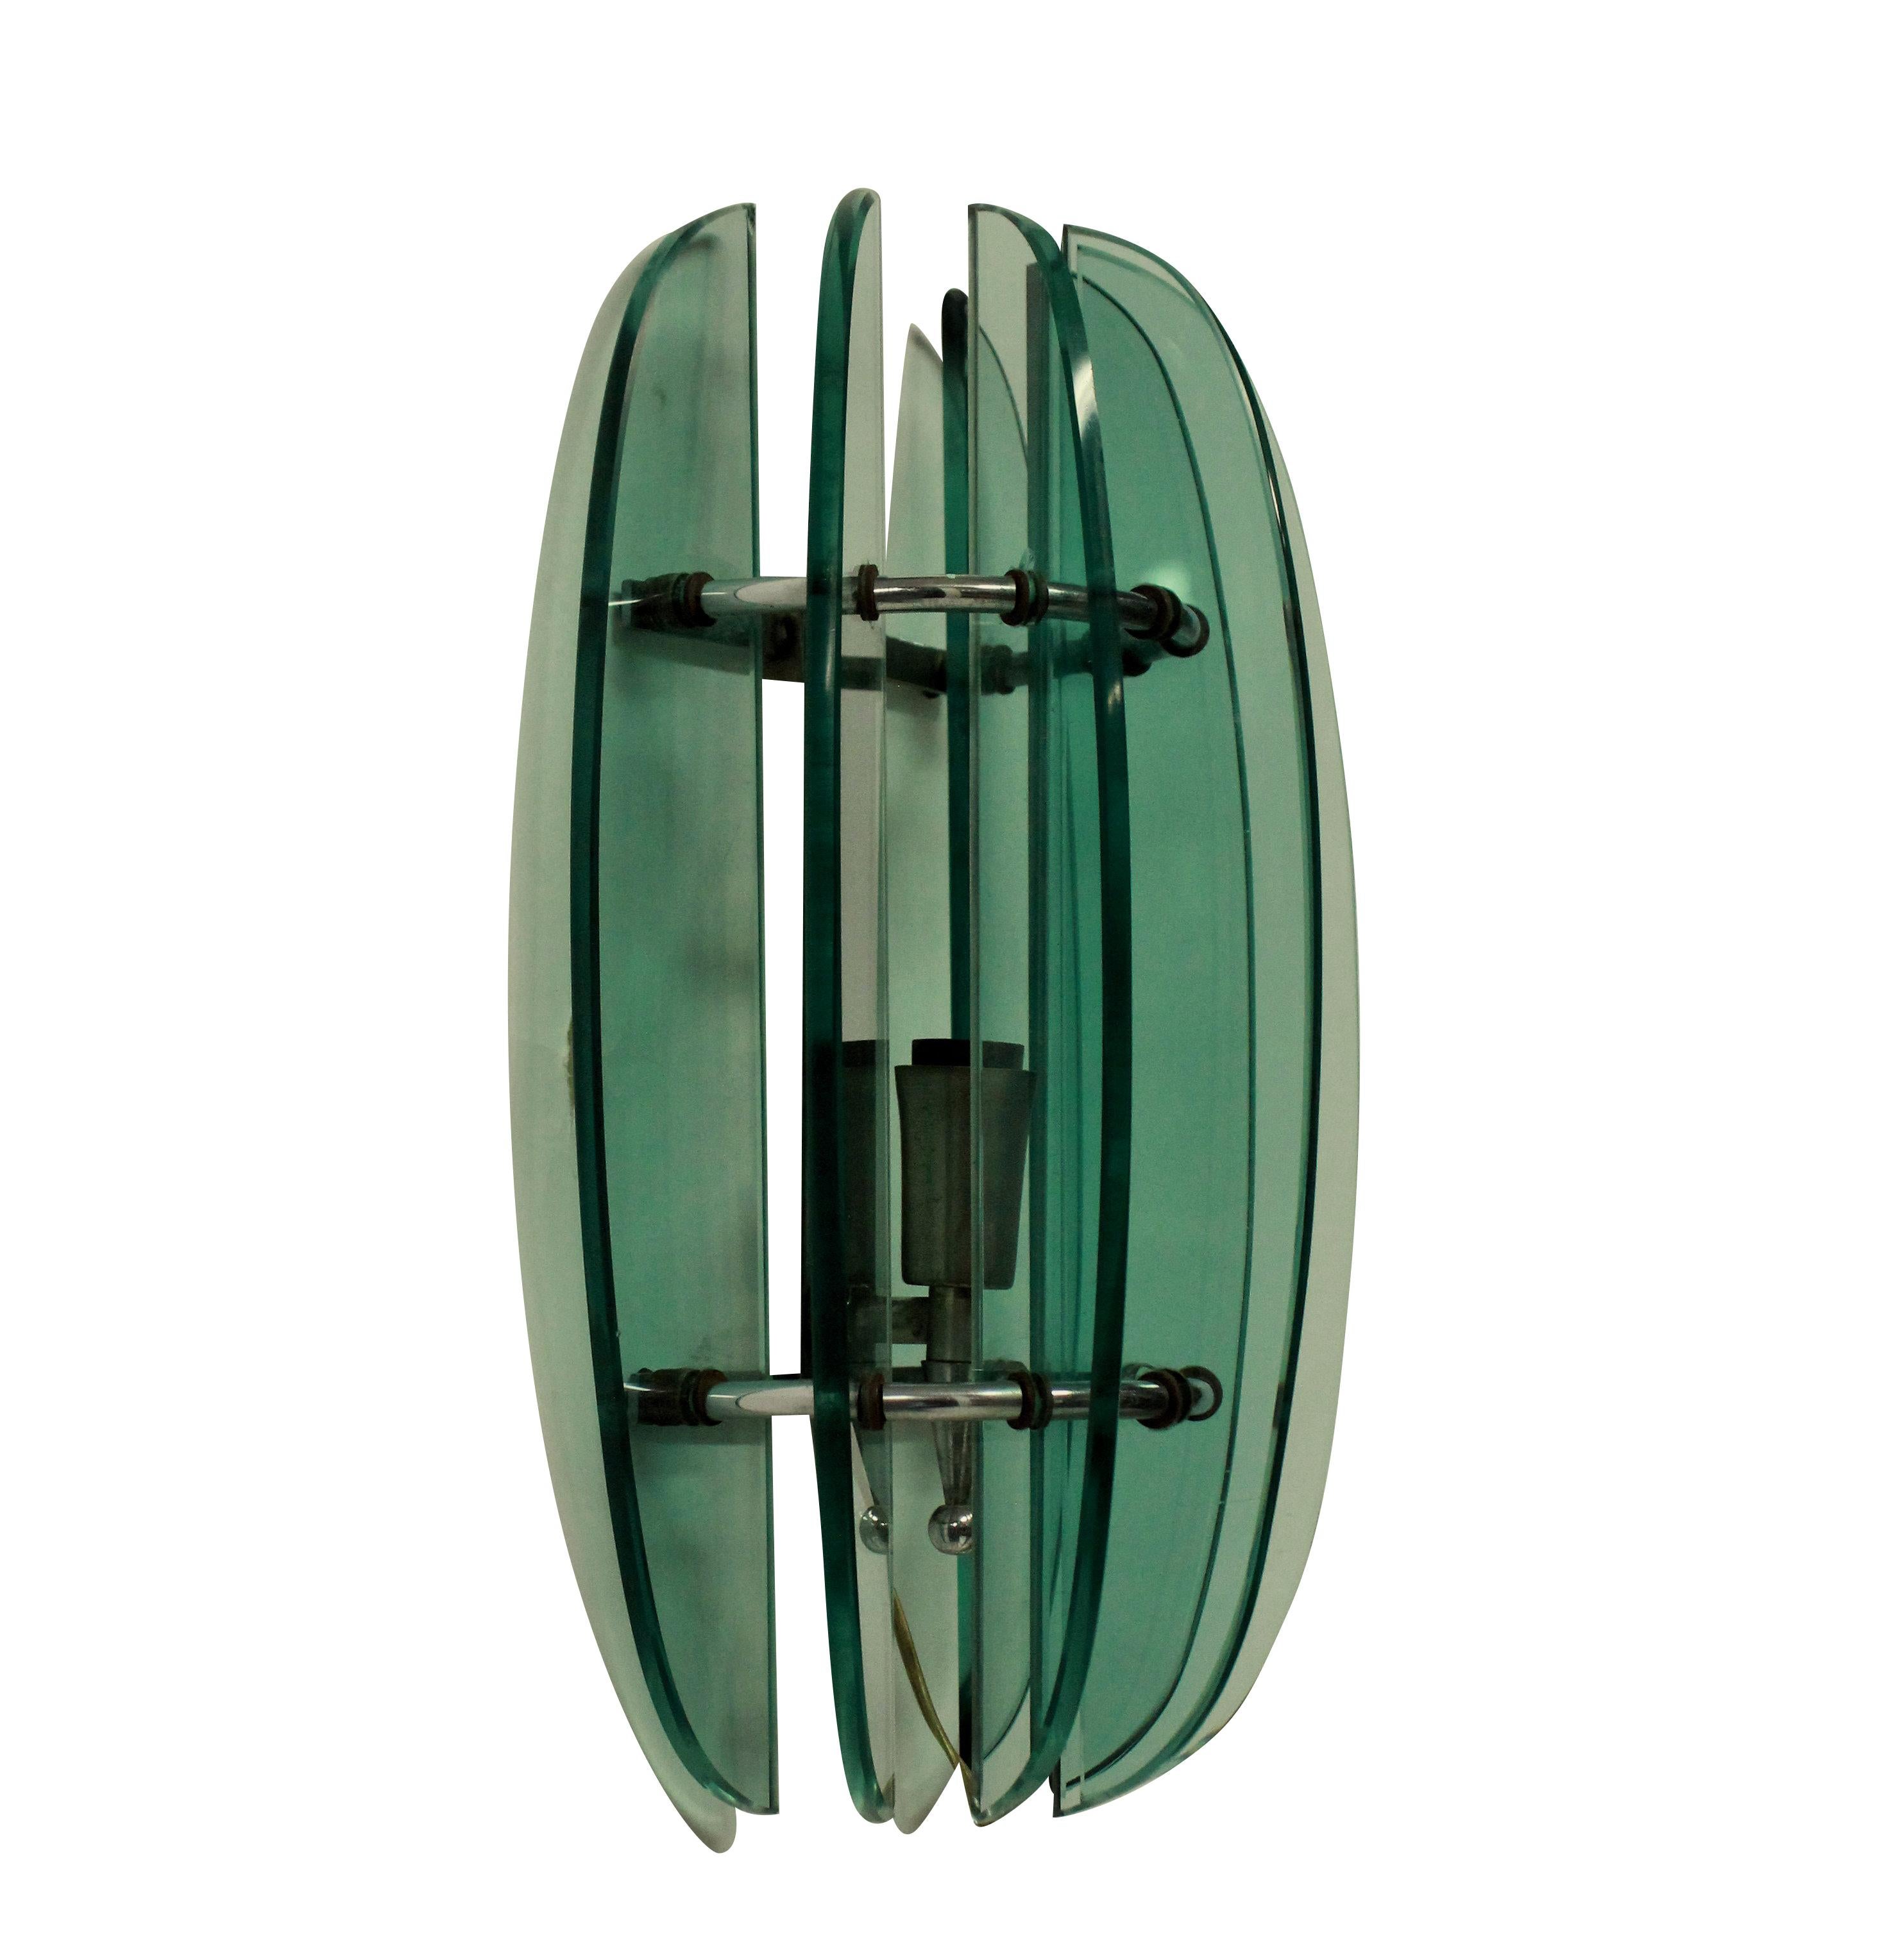 Mid-Century Modern Pair of Green Wall Lights by Veca